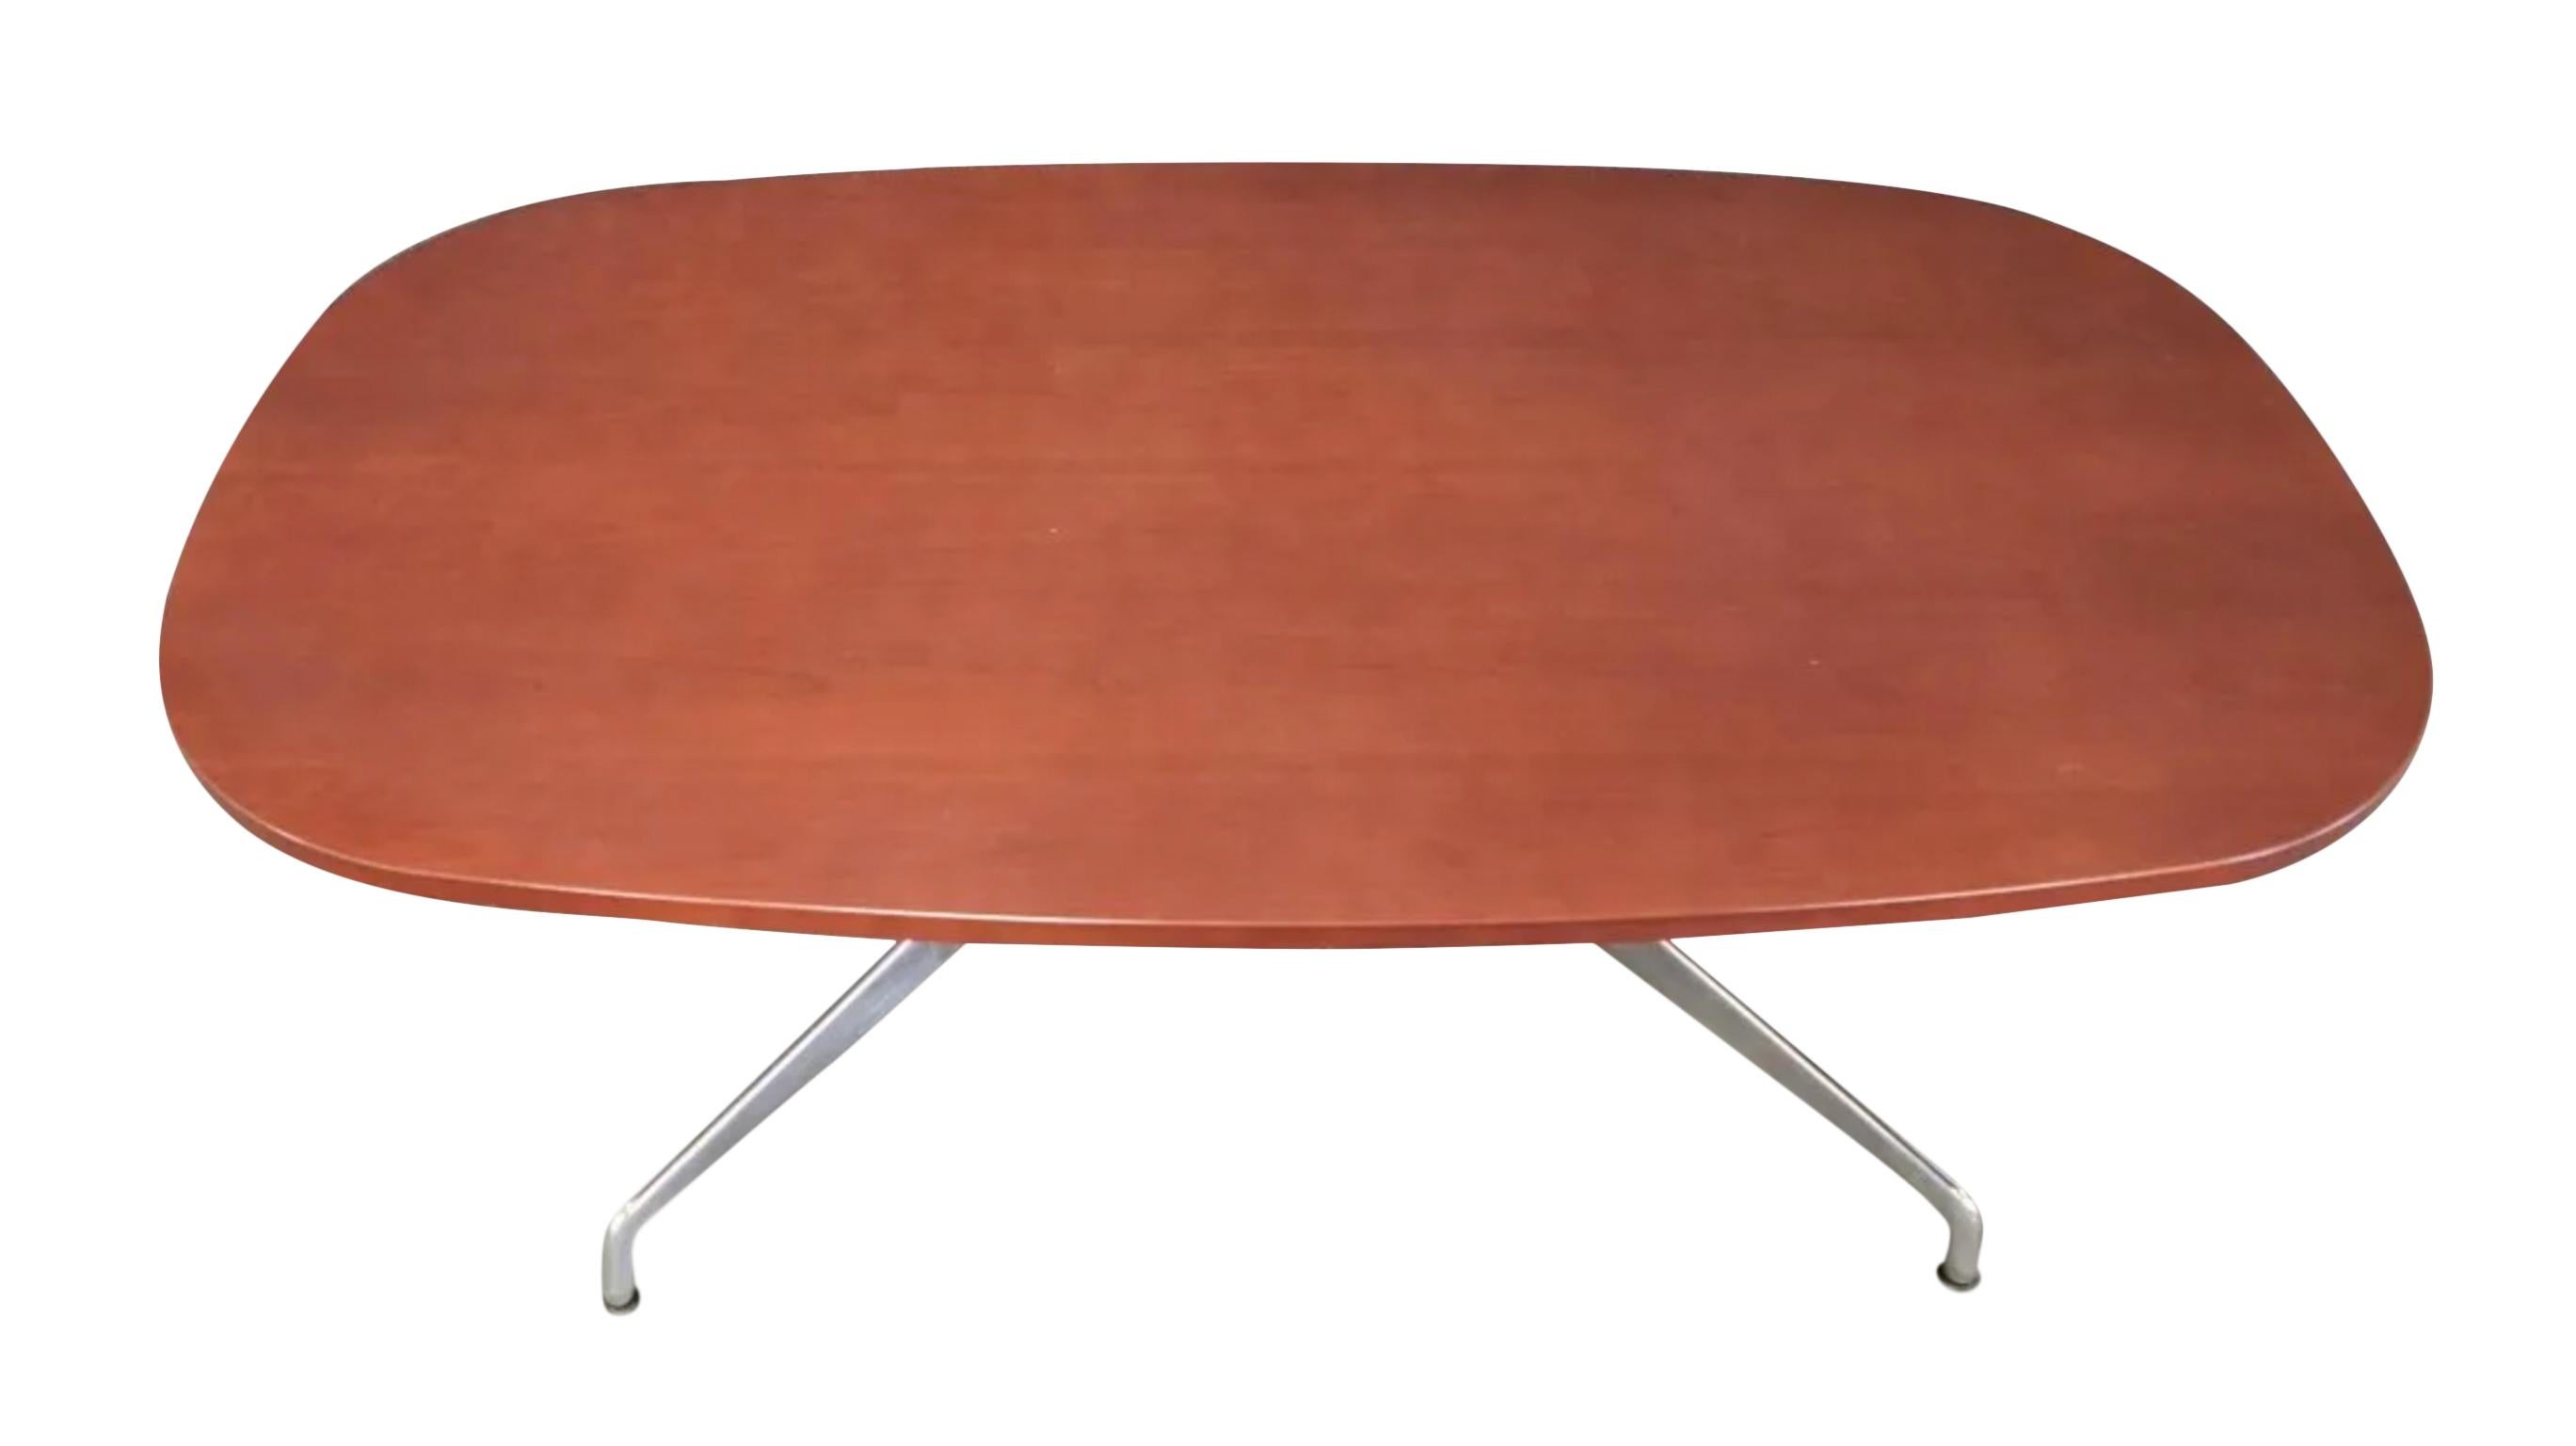 Modern Pre Owned Herman Miller Eames conference or dining table. On polished chrome and aluminum segmented base. This table is Modern. Has a reddish brown wood tone. Located in Brooklyn NYC.

Measures: Very comfortably fits 6 chairs.
knee hole